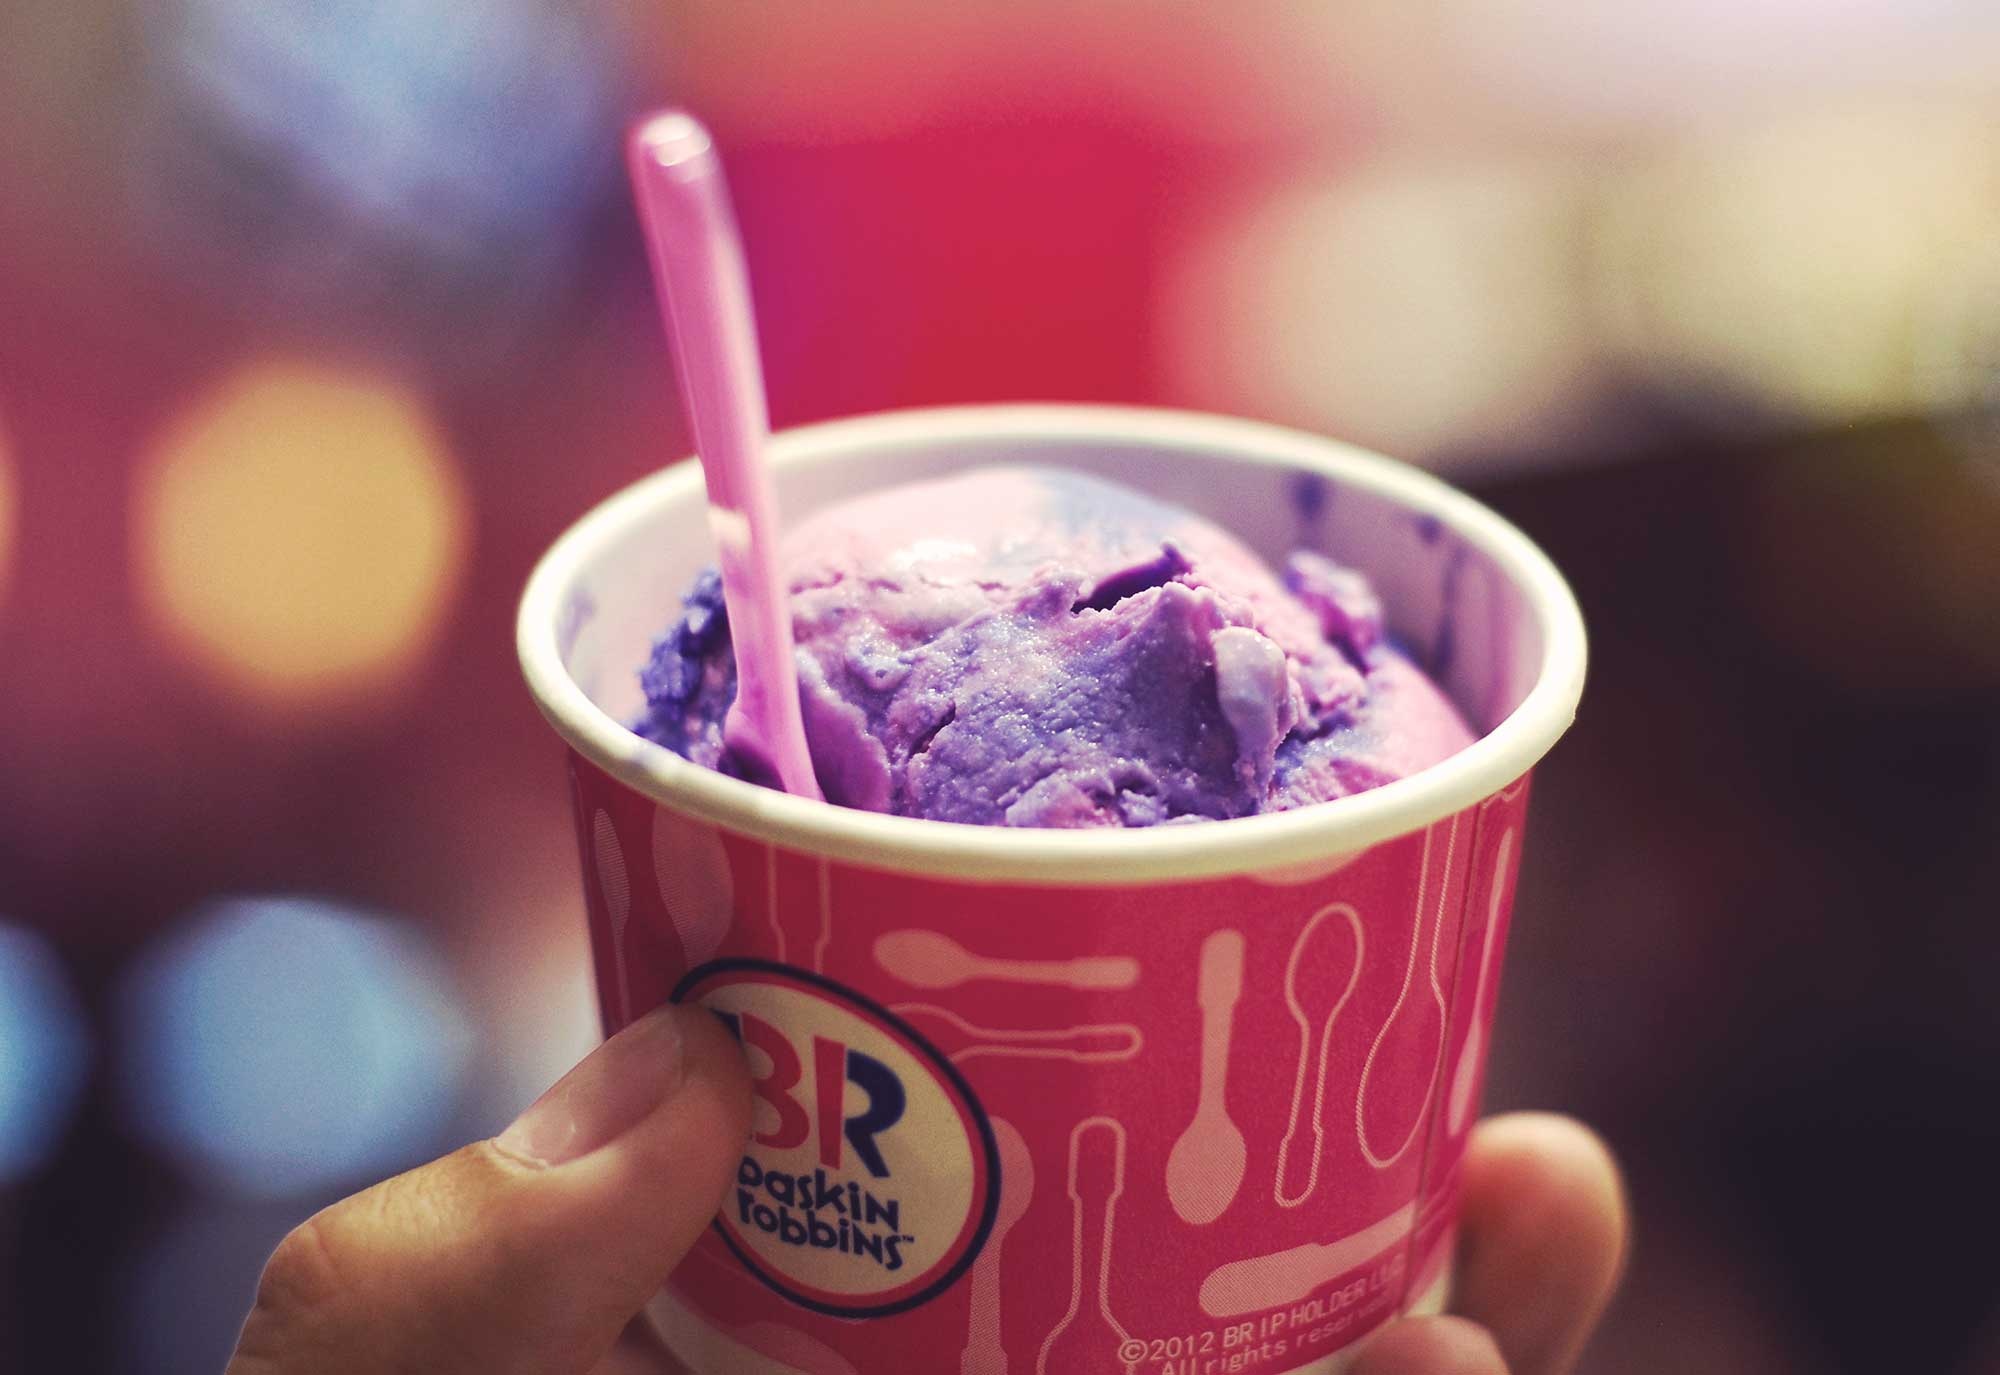 Baskin Robbins: The chain known for their long list of delicious flavors and pink spoons. 2000x1380 HD Wallpaper.